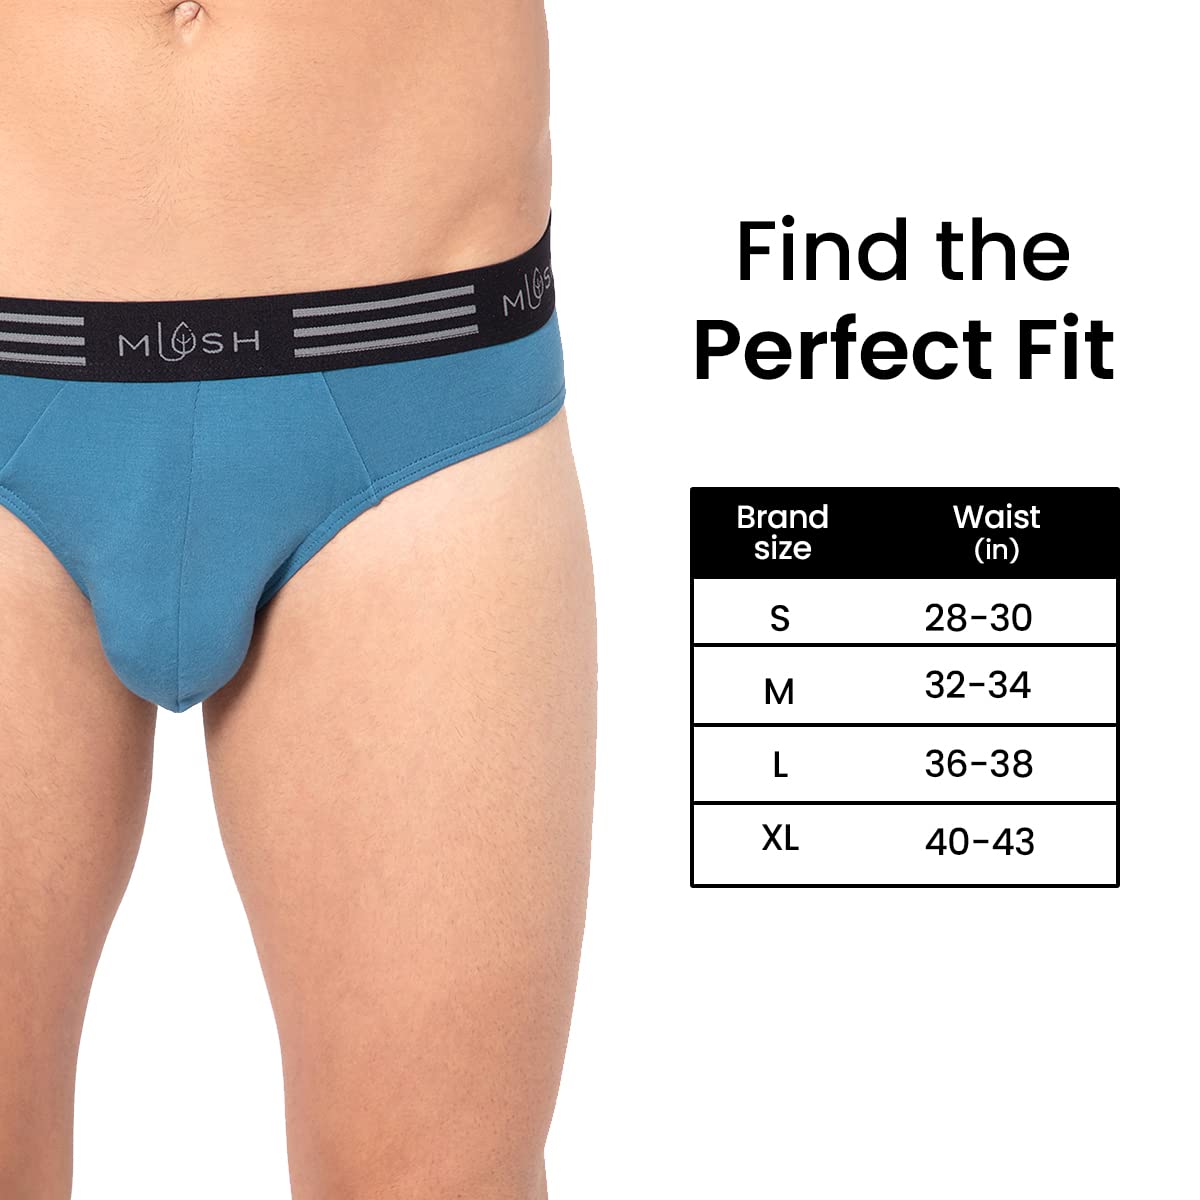 Mush Ultra Soft, Breathable, Feather Light Men's Bamboo Brief || Naturally Anti-Odor and Anti-Microbial Bamboo Innerwear Pack of 3 (M, Blue)